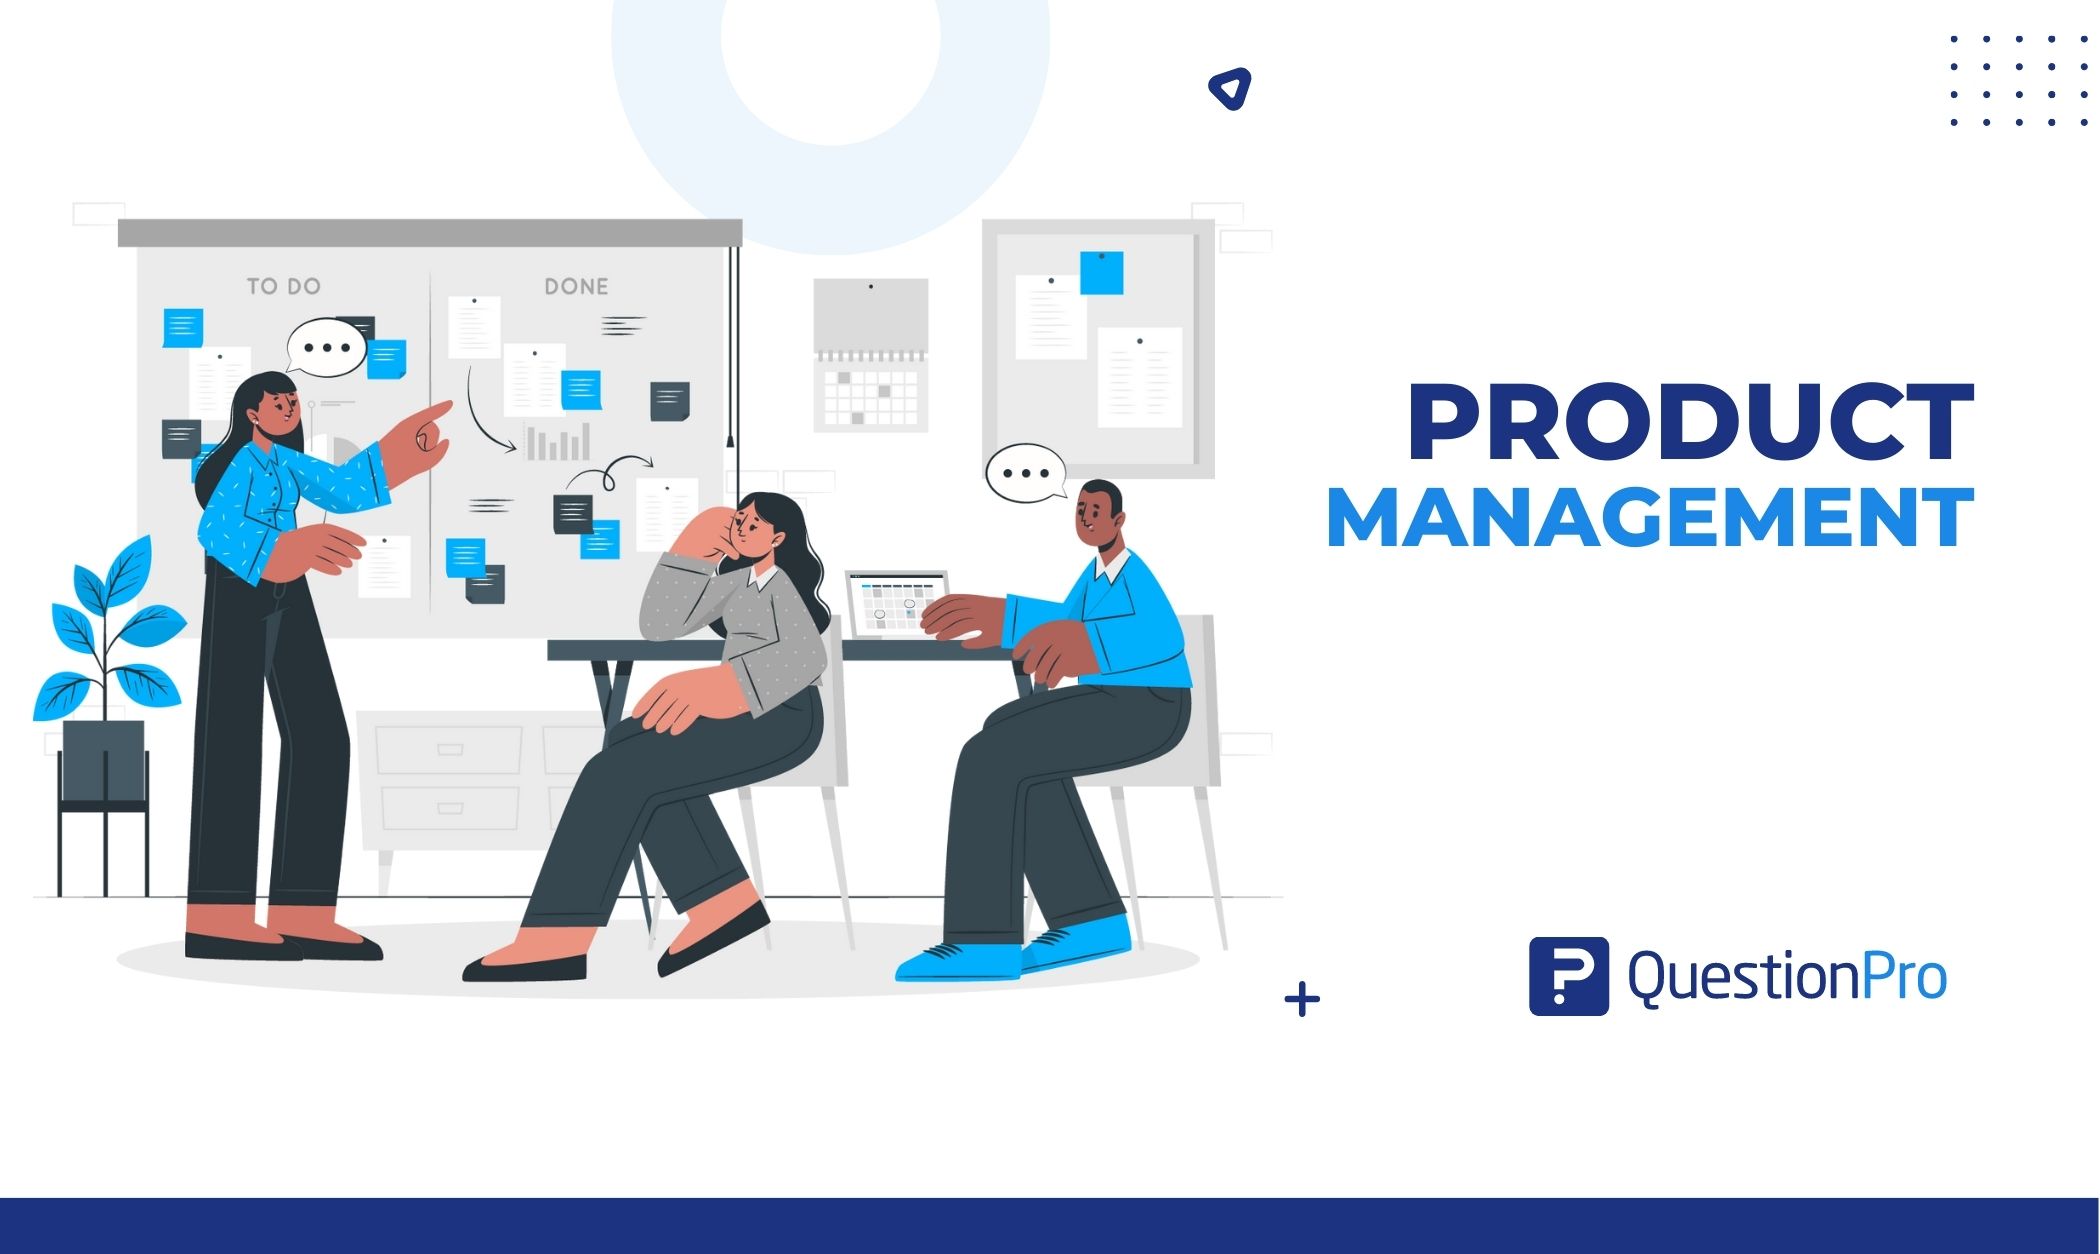 Product management recognizes the product and its customers throughout its lifecycle, from development to positioning and price. Learn more.